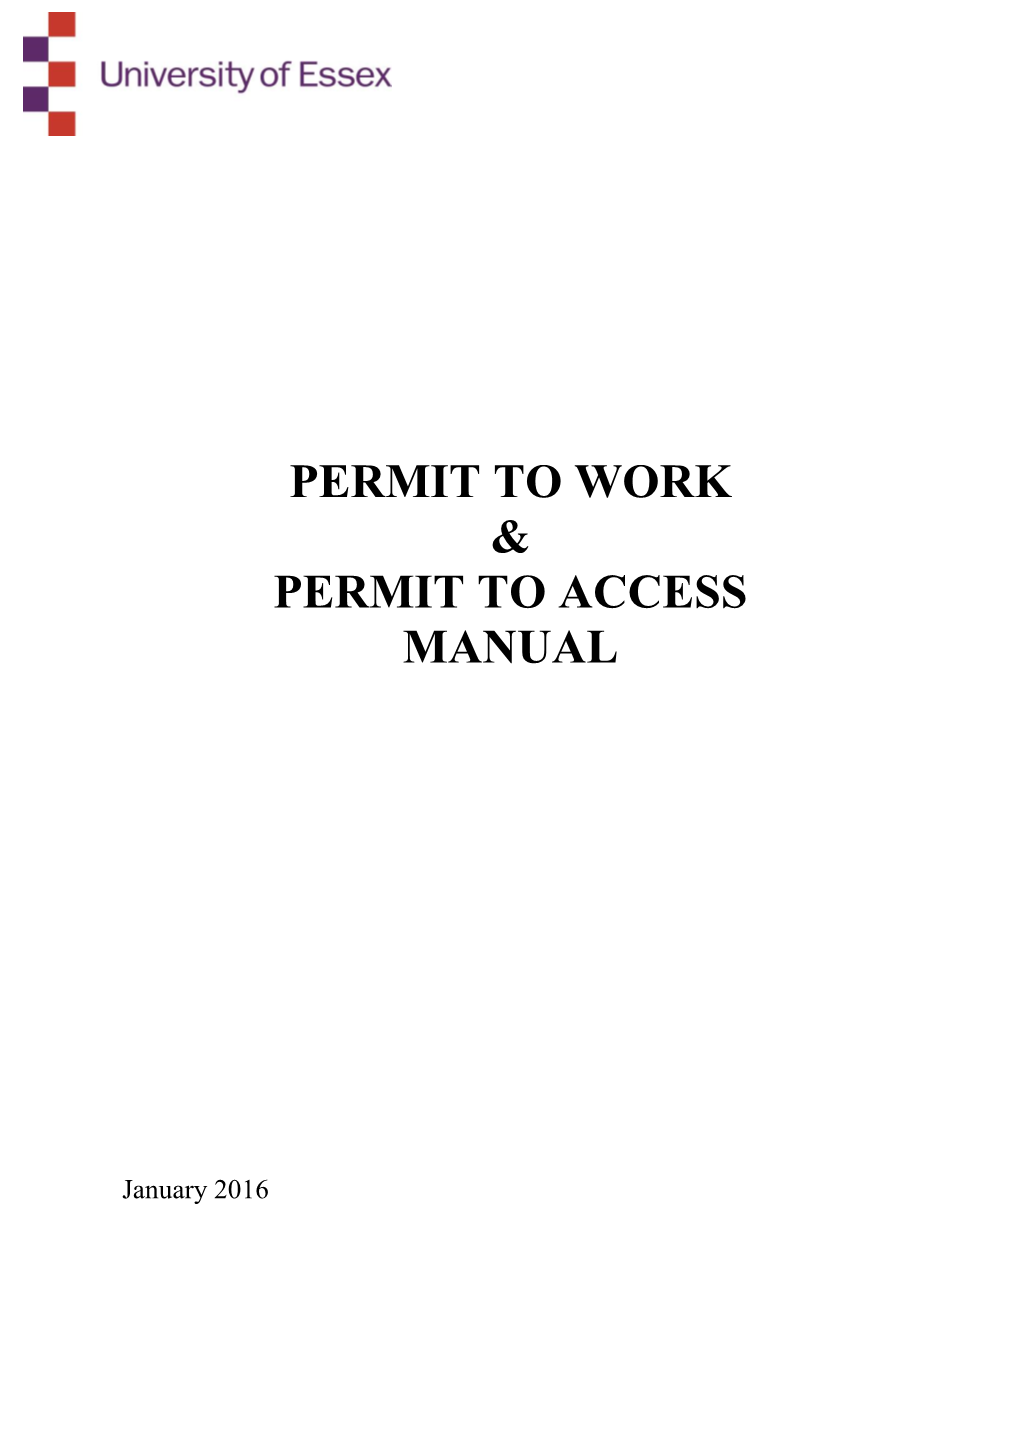 Permit to Work & Permit to Access Manual